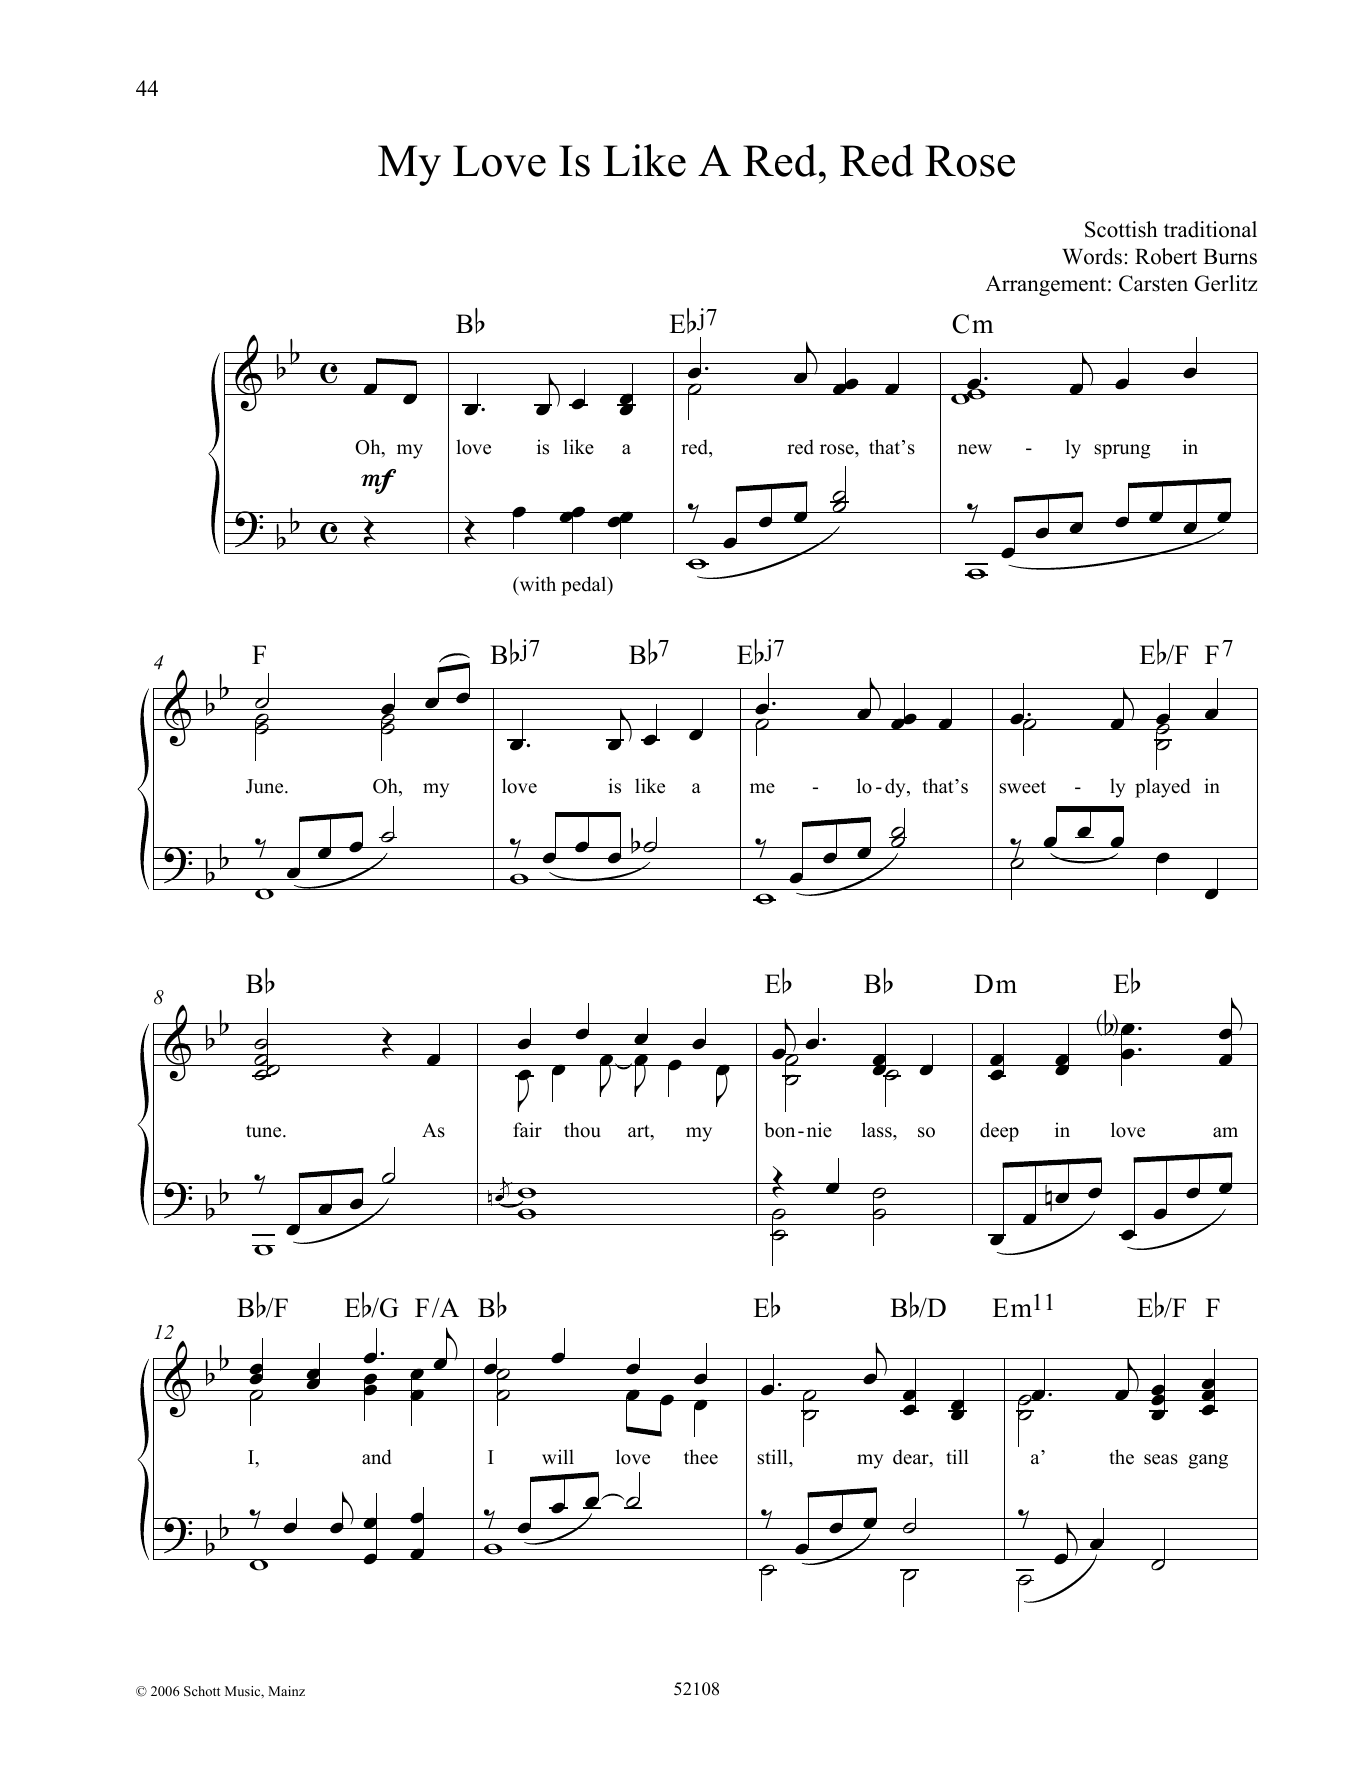 Download Robert Burns My Love Is like a Red, Red Rose Sheet Music